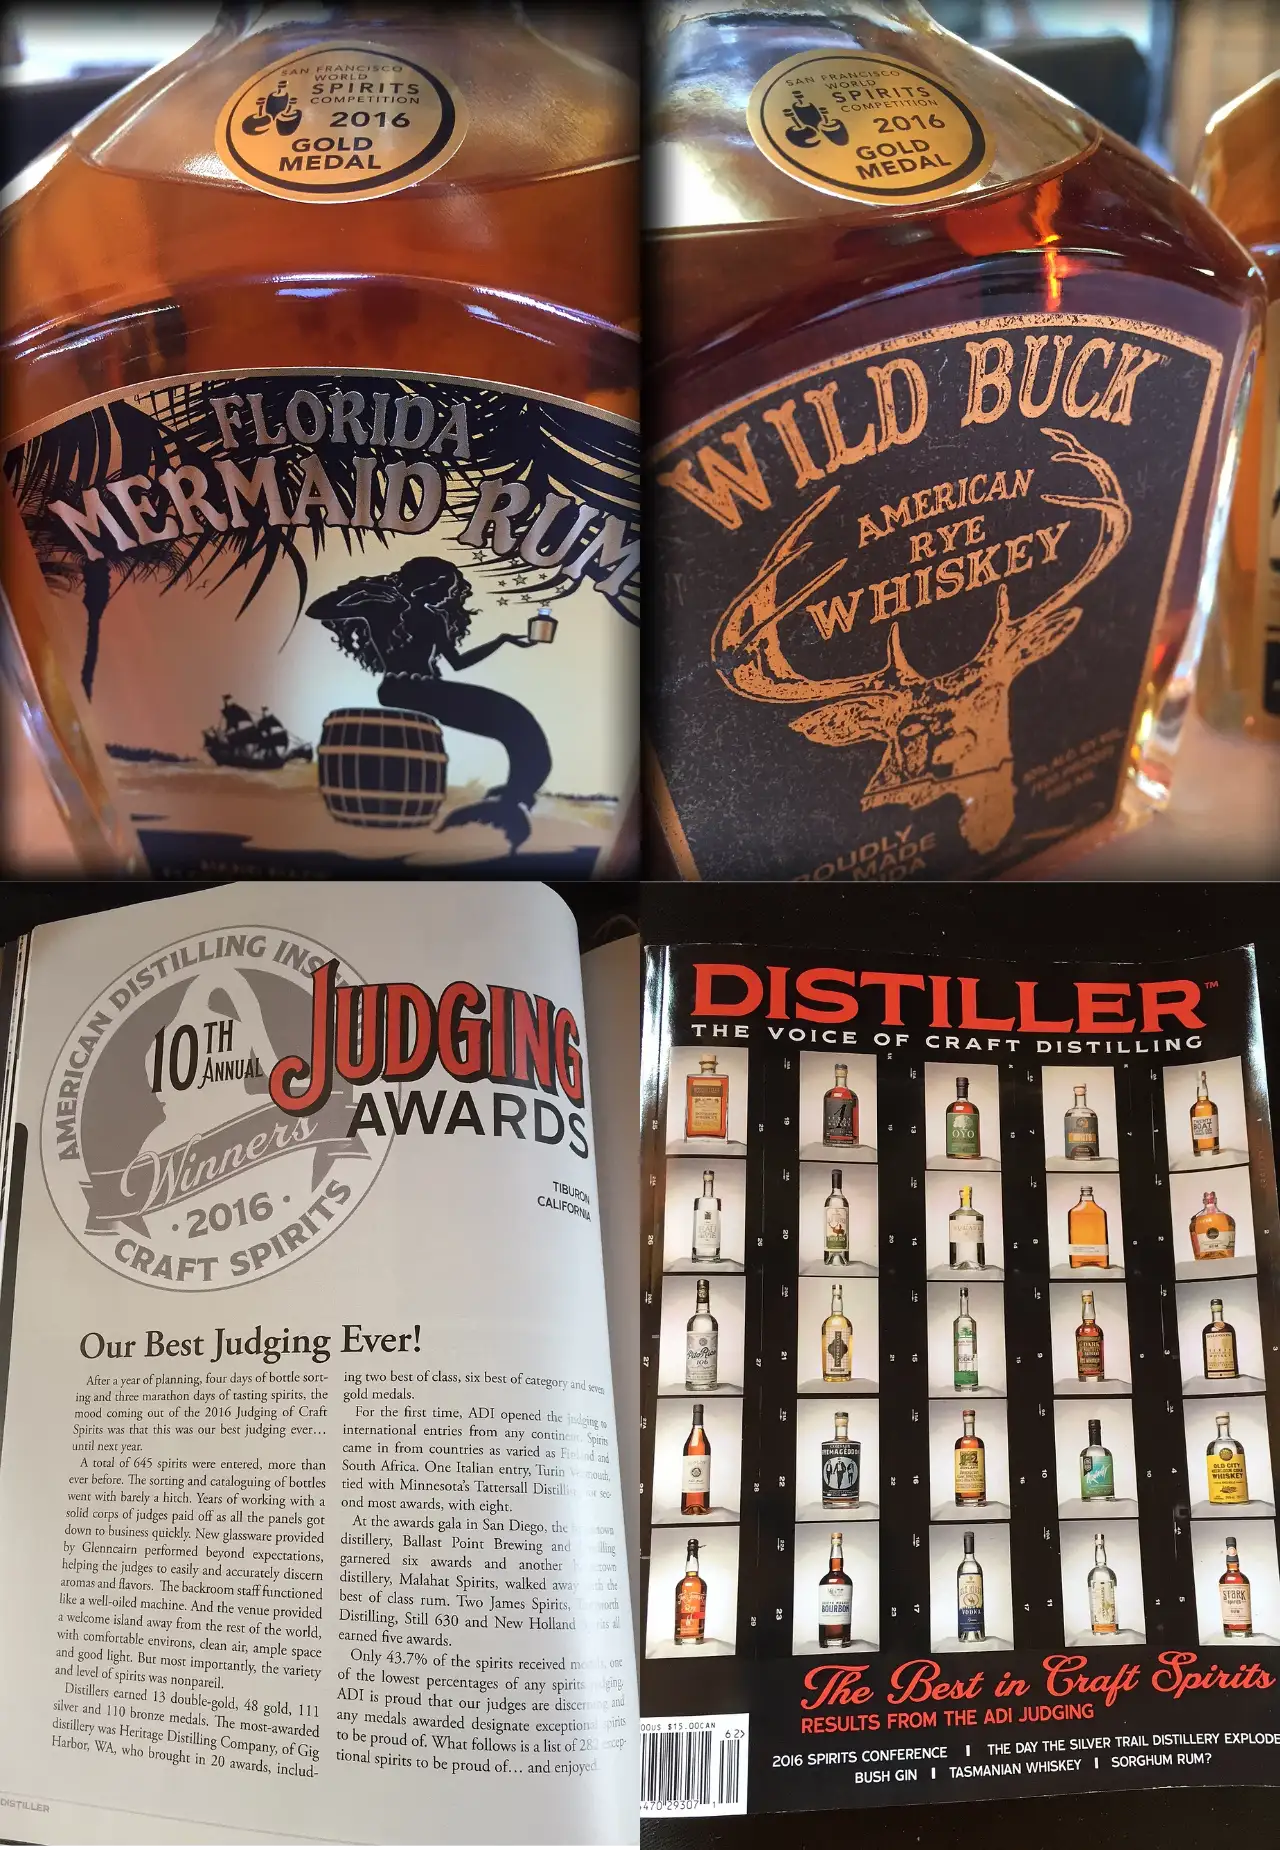 Two gold awards from the American Distilling Institutes Spirits Competition in San Diego - Mermaid Rum